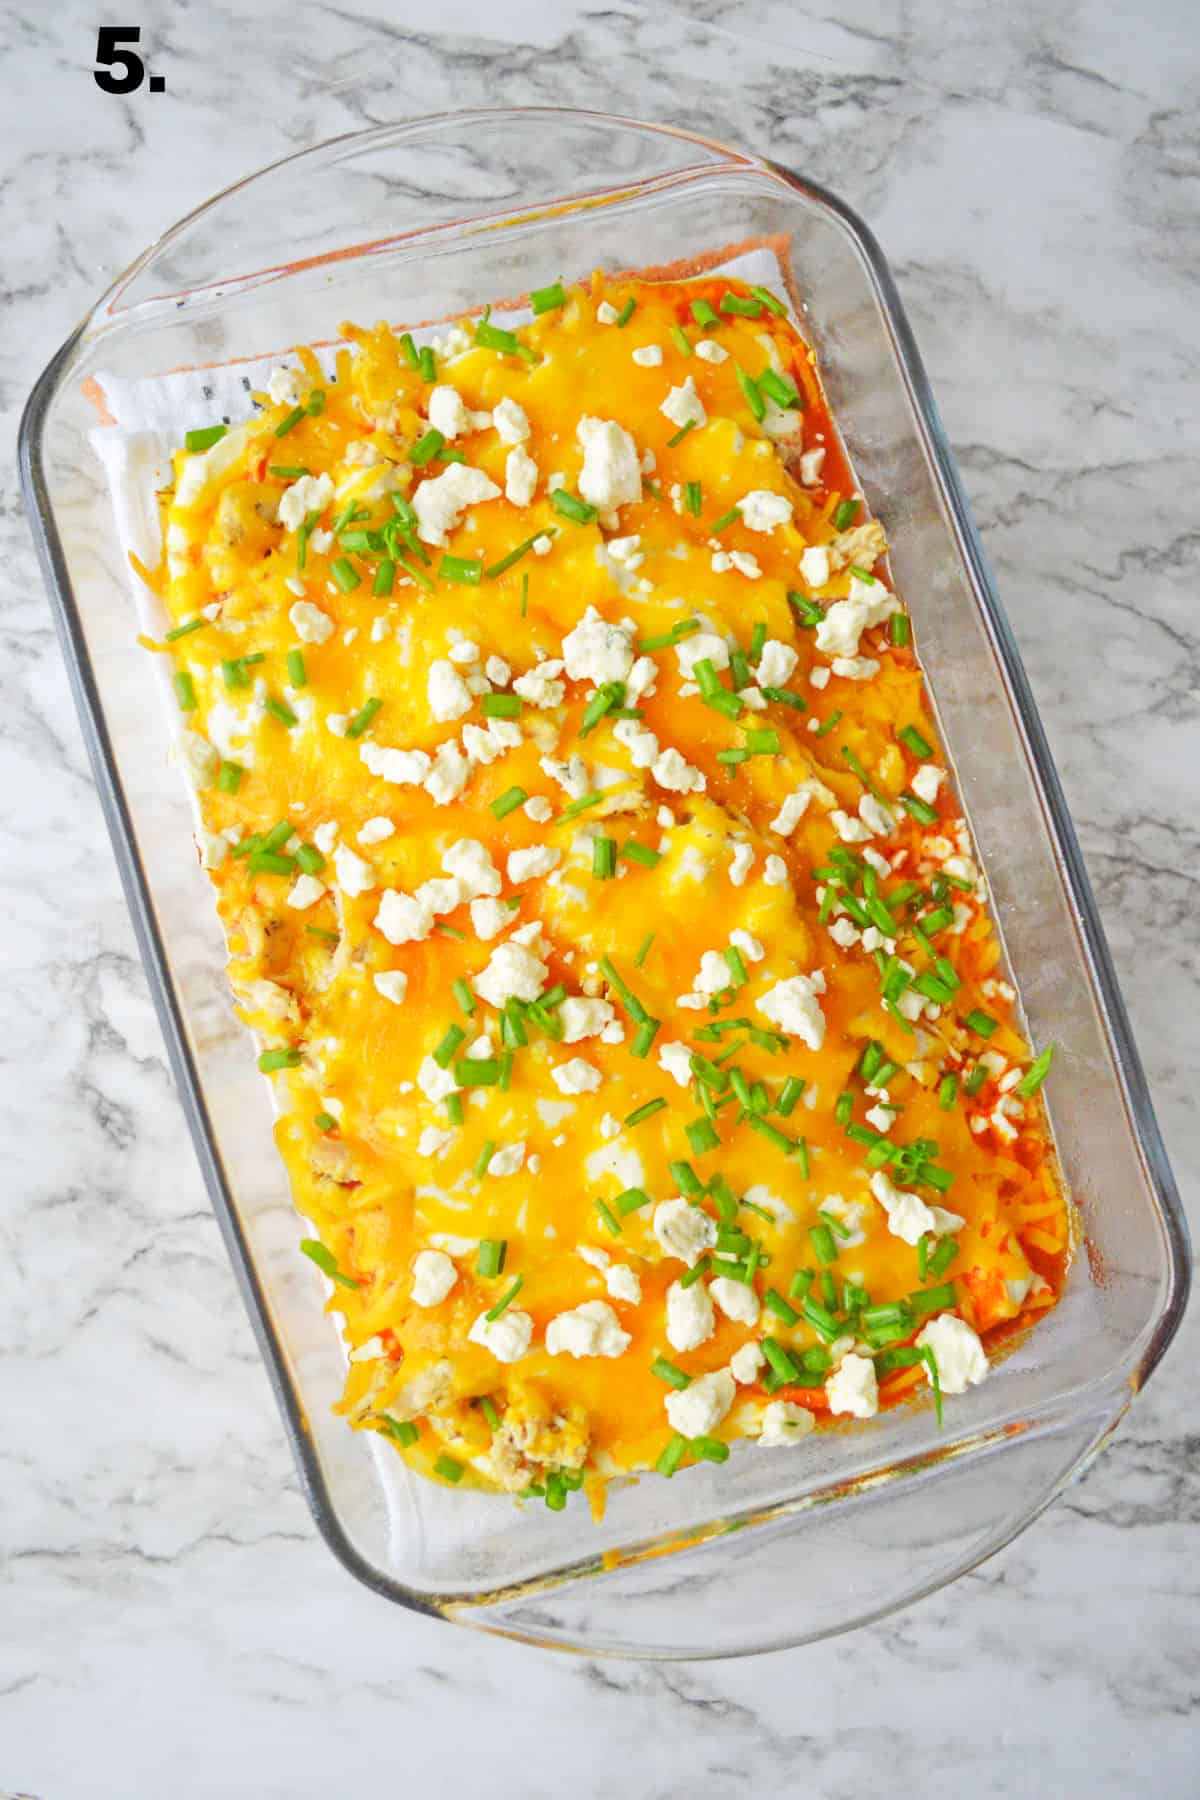 How to Make Buffalo Chicken Dip with Blue Cheese - Step 5 - Add green onions and warm dip.